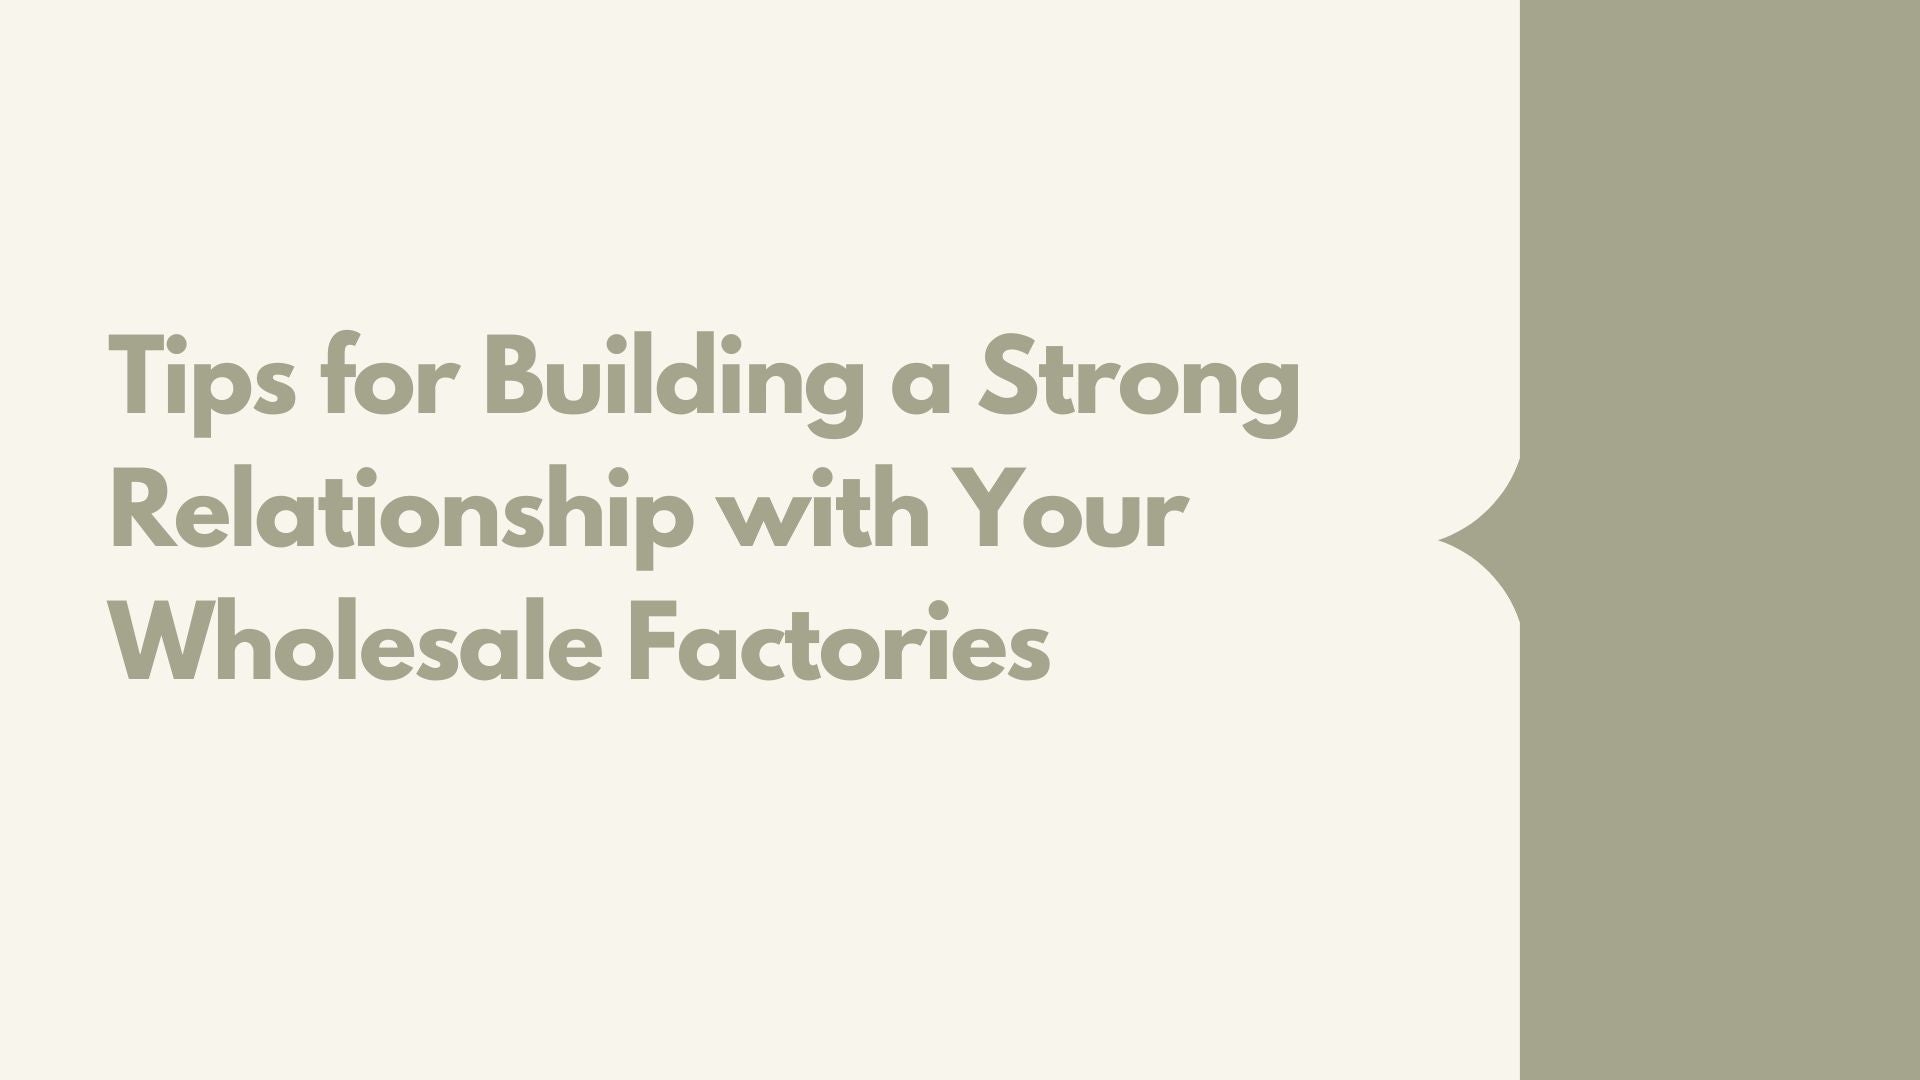 Tips for Building a Strong Relationship with Your Wholesale Factories